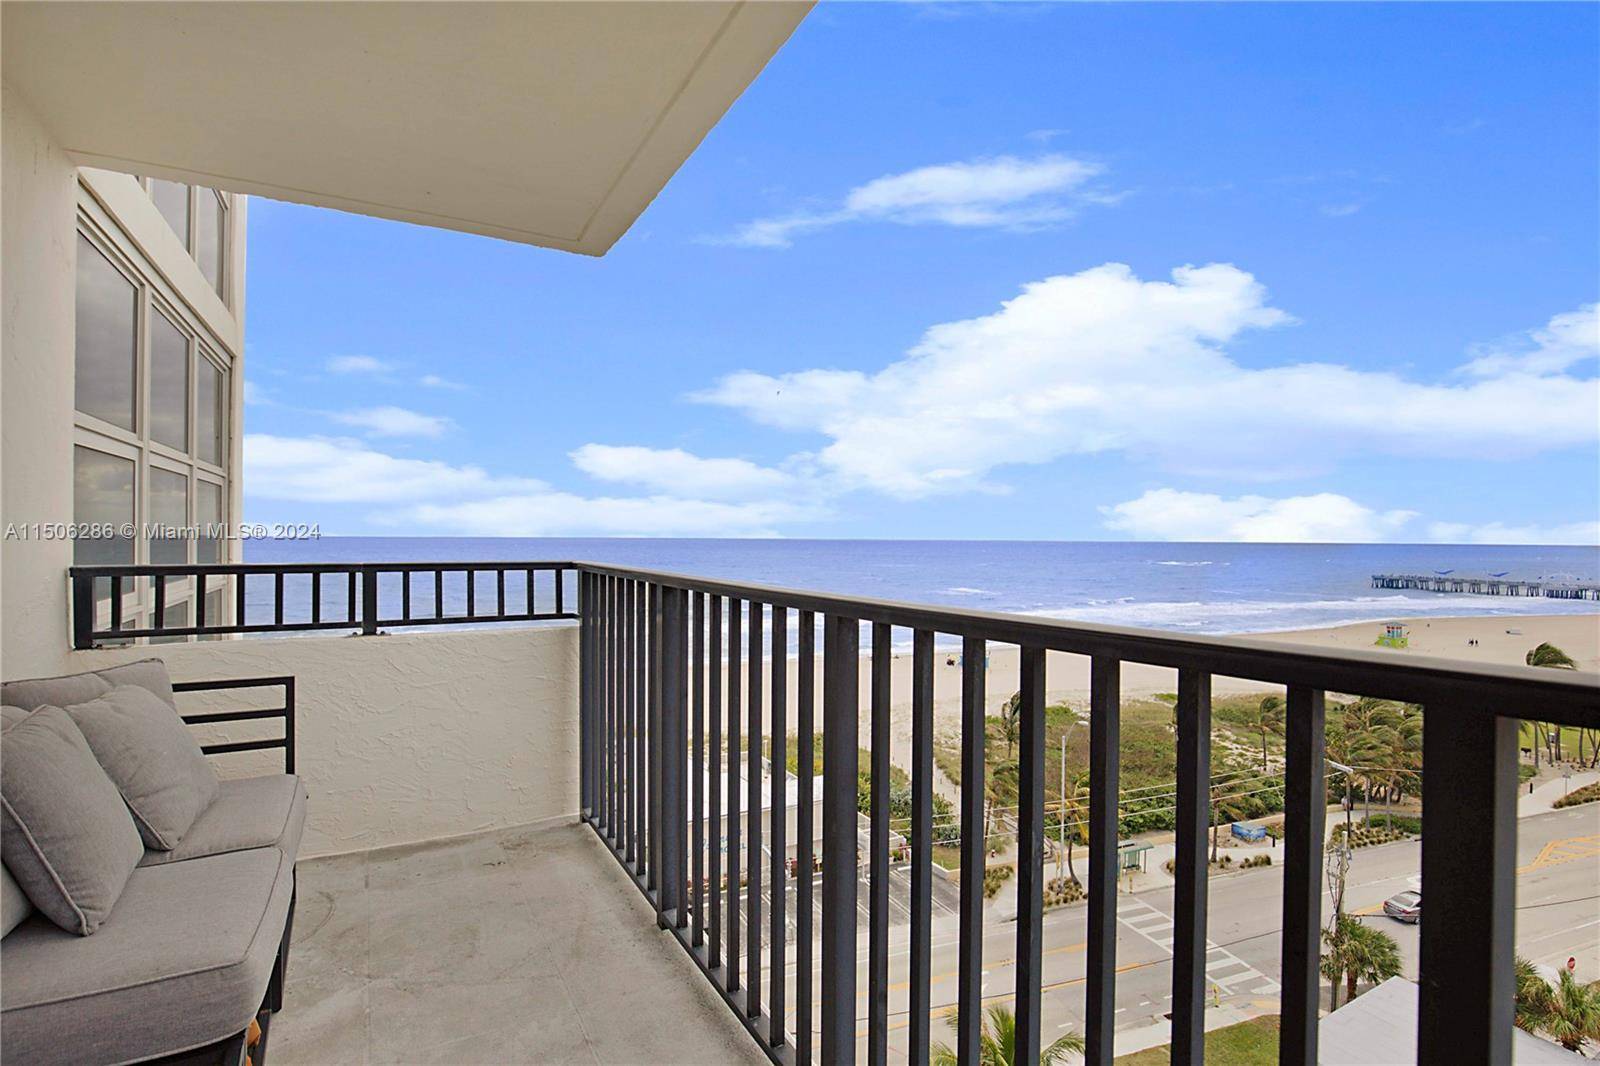 Experience coastal luxury in this meticulously remodeled property with direct ocean views, steps from Pompano's beaches, shopping and award winning dining.